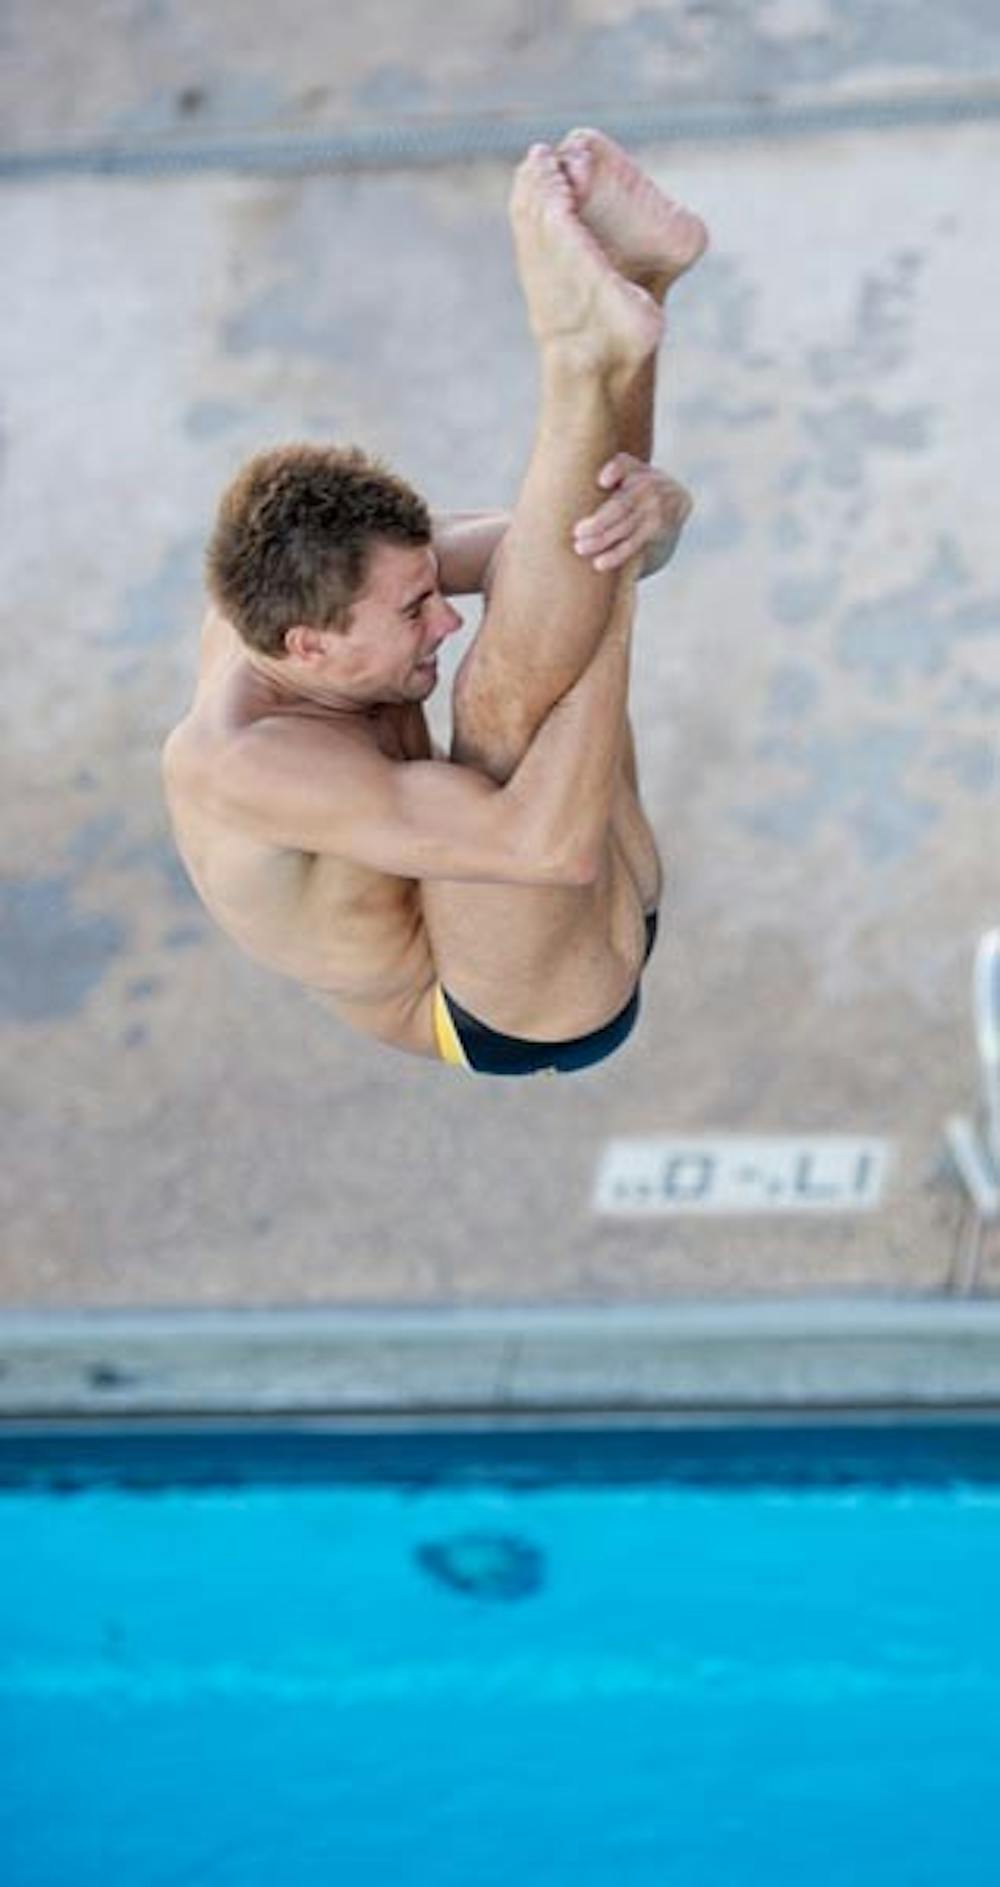 WELL TUCKED: ASU junior Constantin Blaha works on his form during practice last week. Blaha won the 3-meter final at the Wildcat Invitational in Tucson on Saturday with a score of 405.85. (Photo by Michael Arellano)